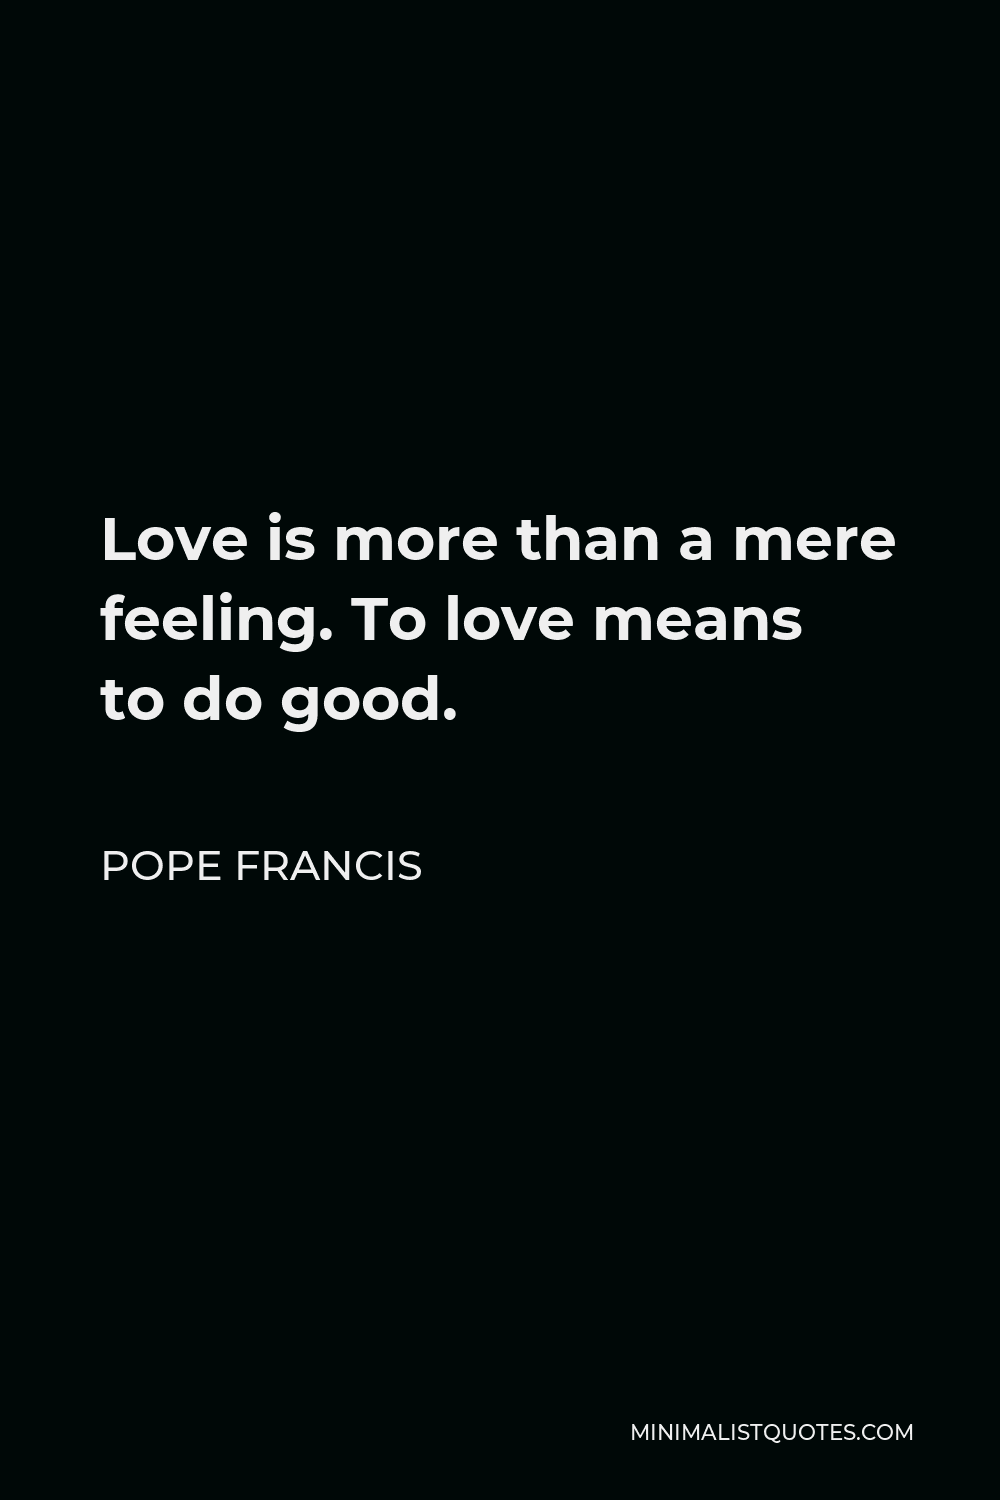 Pope Francis Quote - Love is more than a mere feeling. To love means to do good.